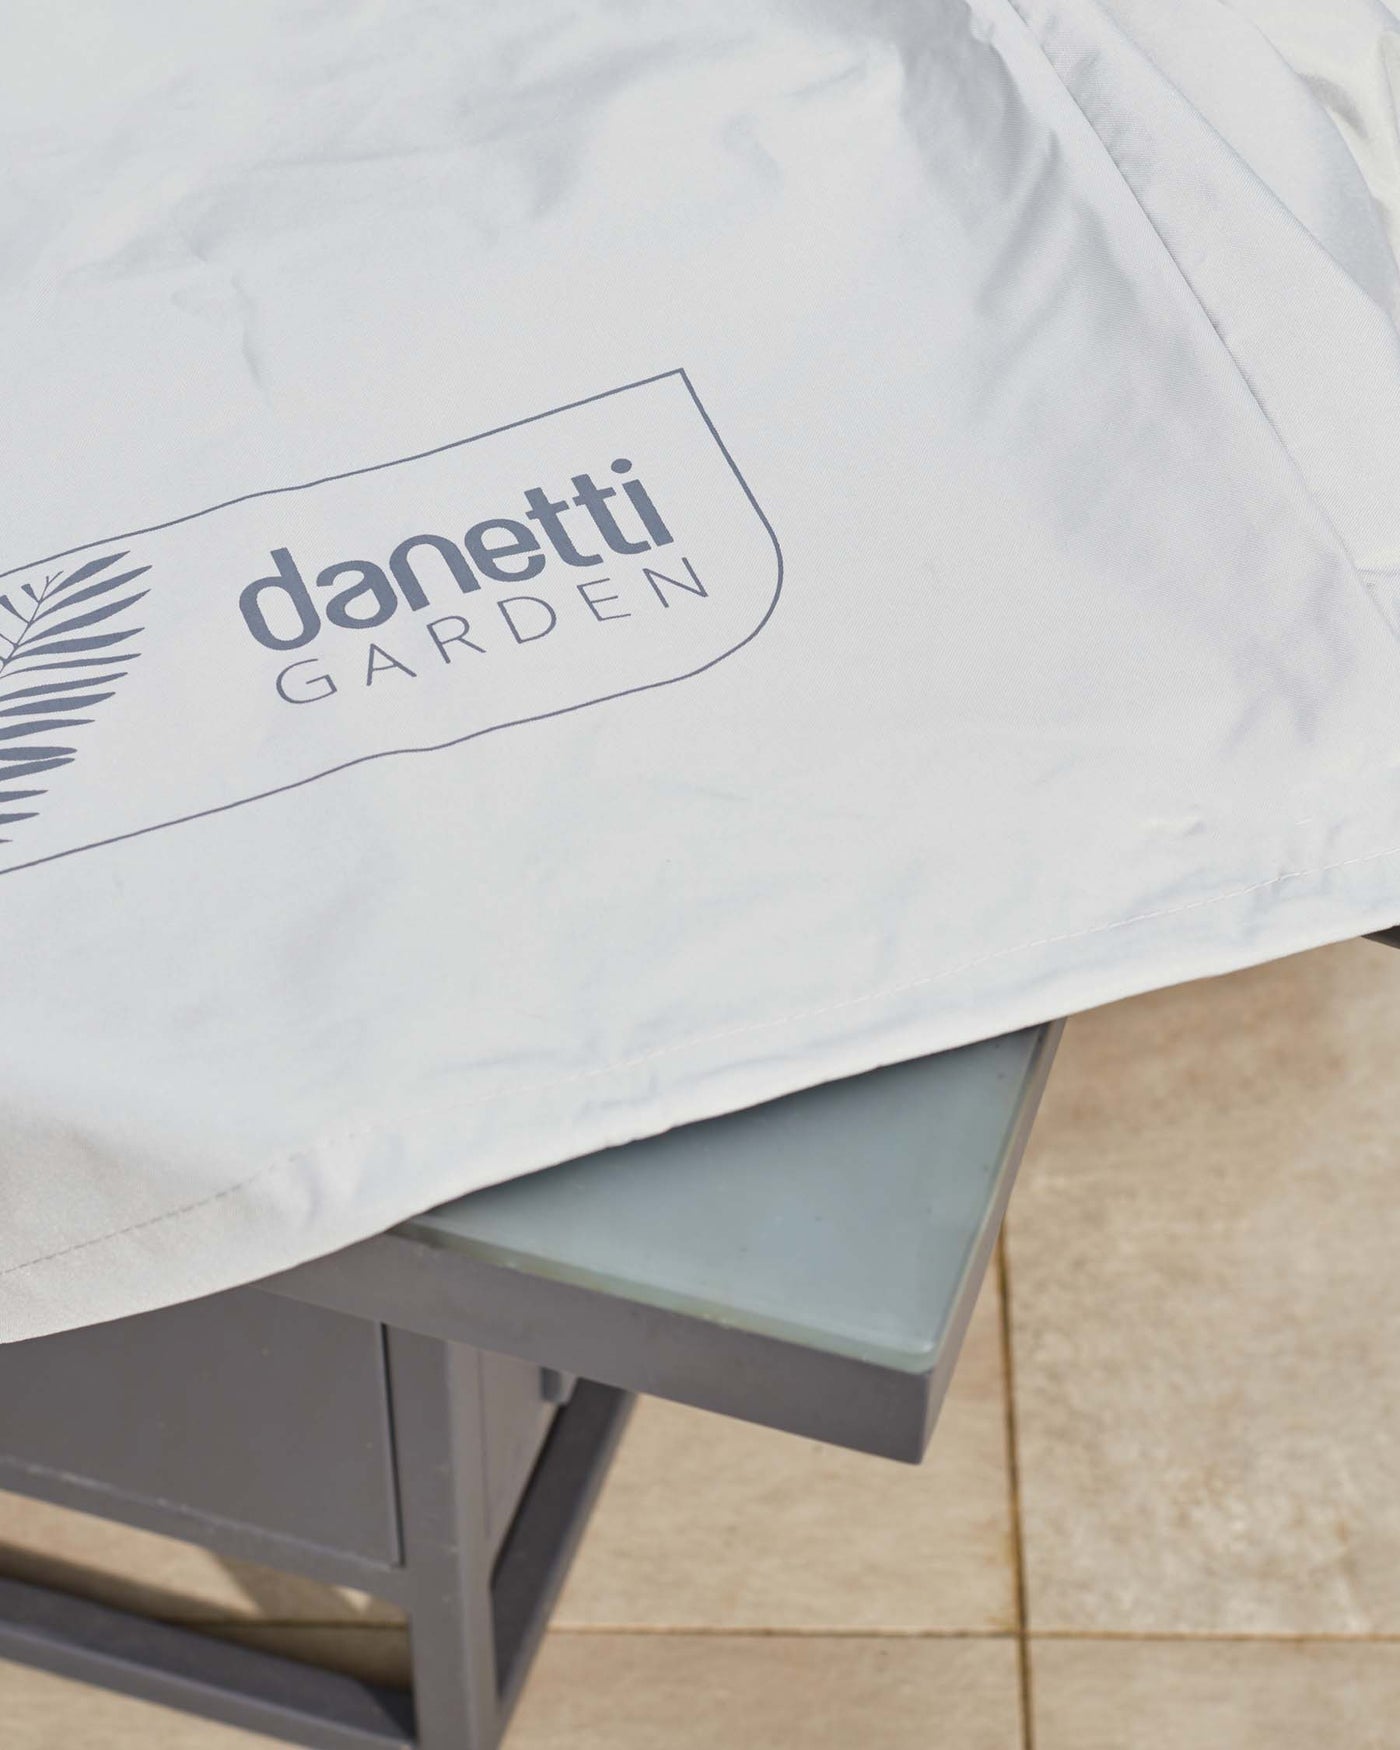 Close-up of a modern outdoor furniture cushion with "Danetti Garden" logo on white fabric, partially covering a glass-topped metal garden table.